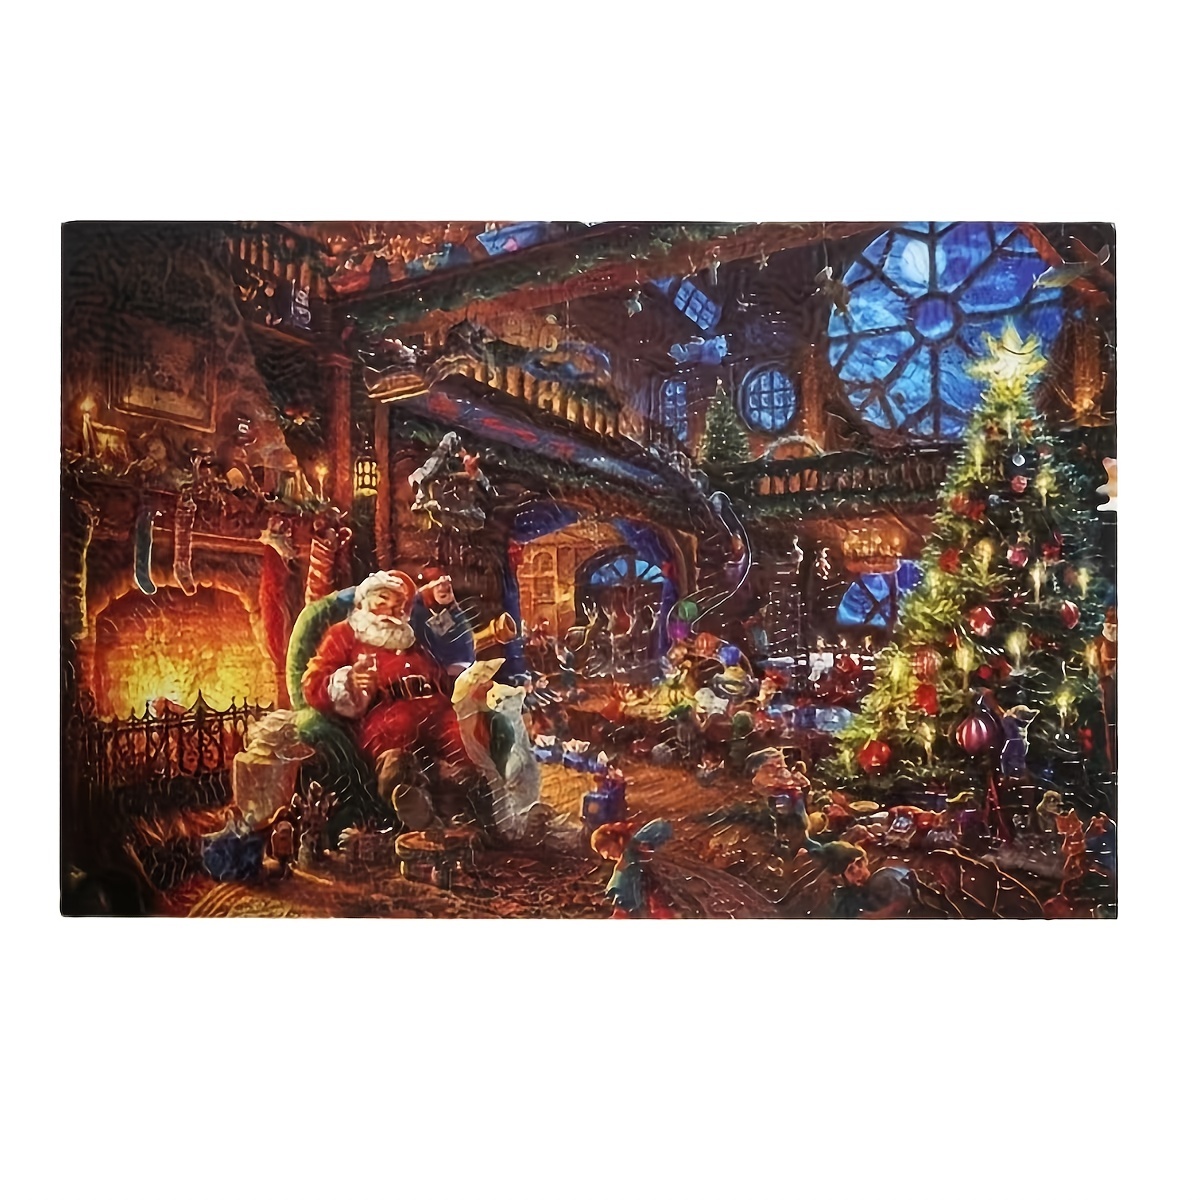 Christmas Puzzles for Adults 1000 Piece Christmas Jigsaw Puzzles Santa  Claus for Kids 27.56 x 19.69 Inch Challenge Toy Gift Educational Game  Christmas